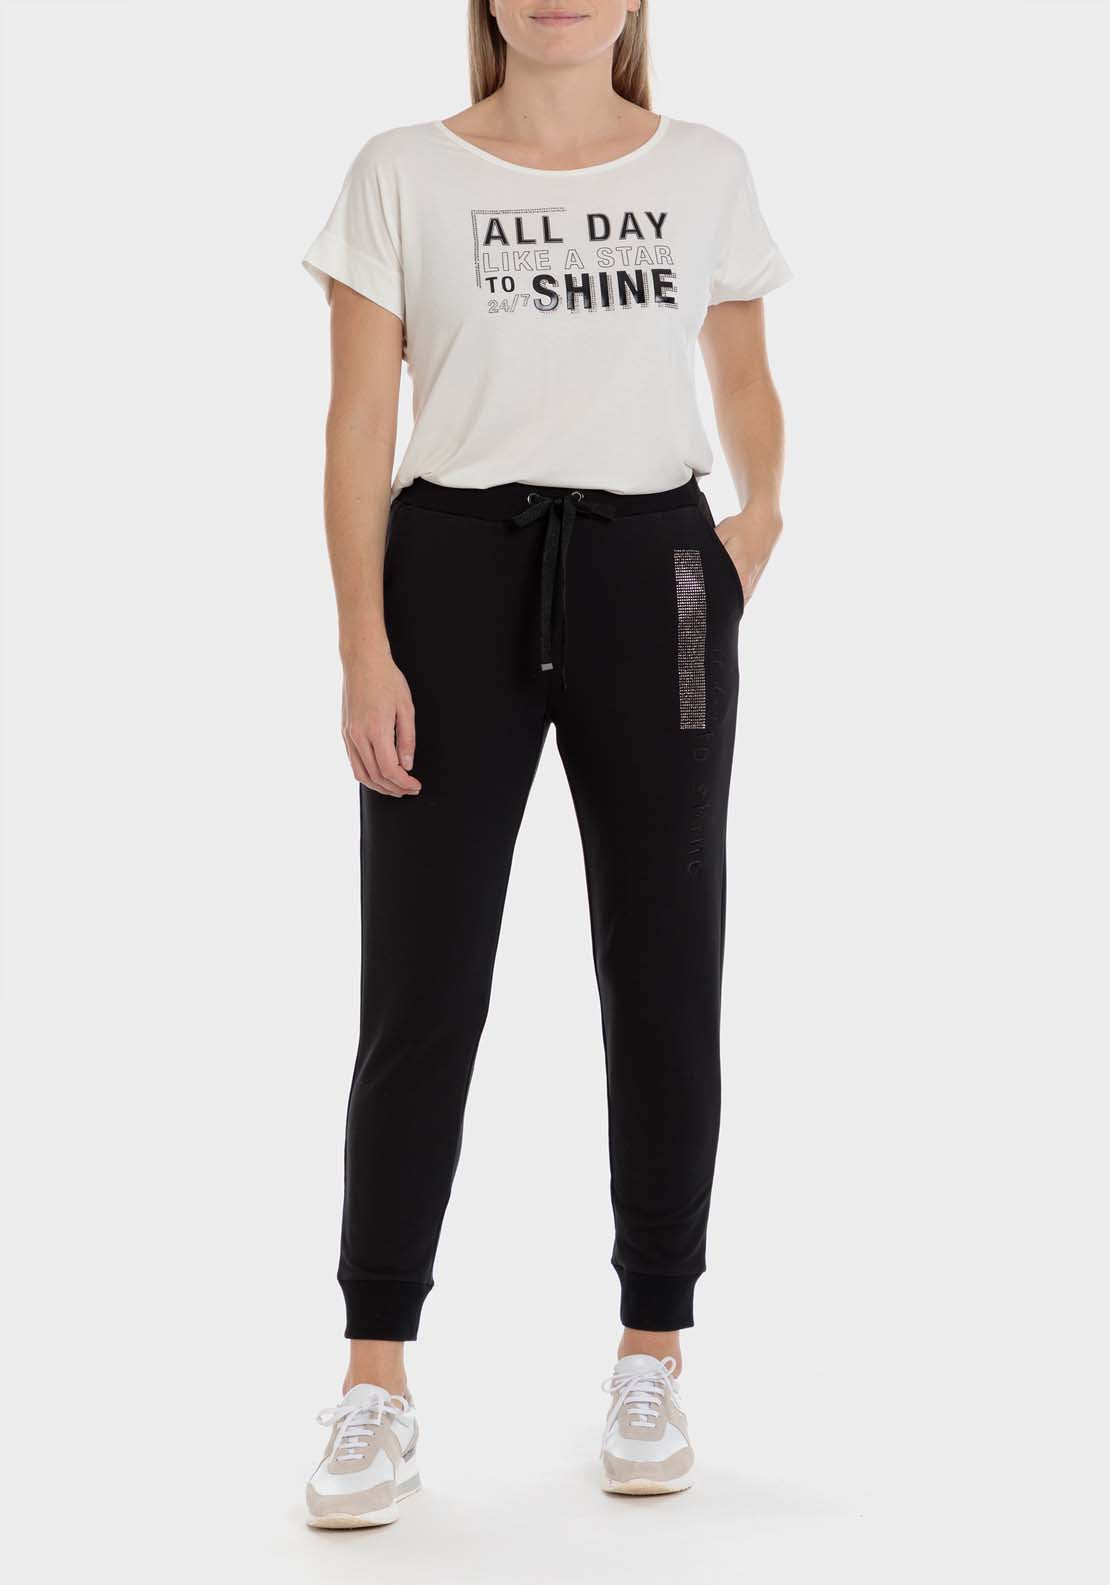 Punt Roma Black Comfy Trousers - Black 3 Shaws Department Stores